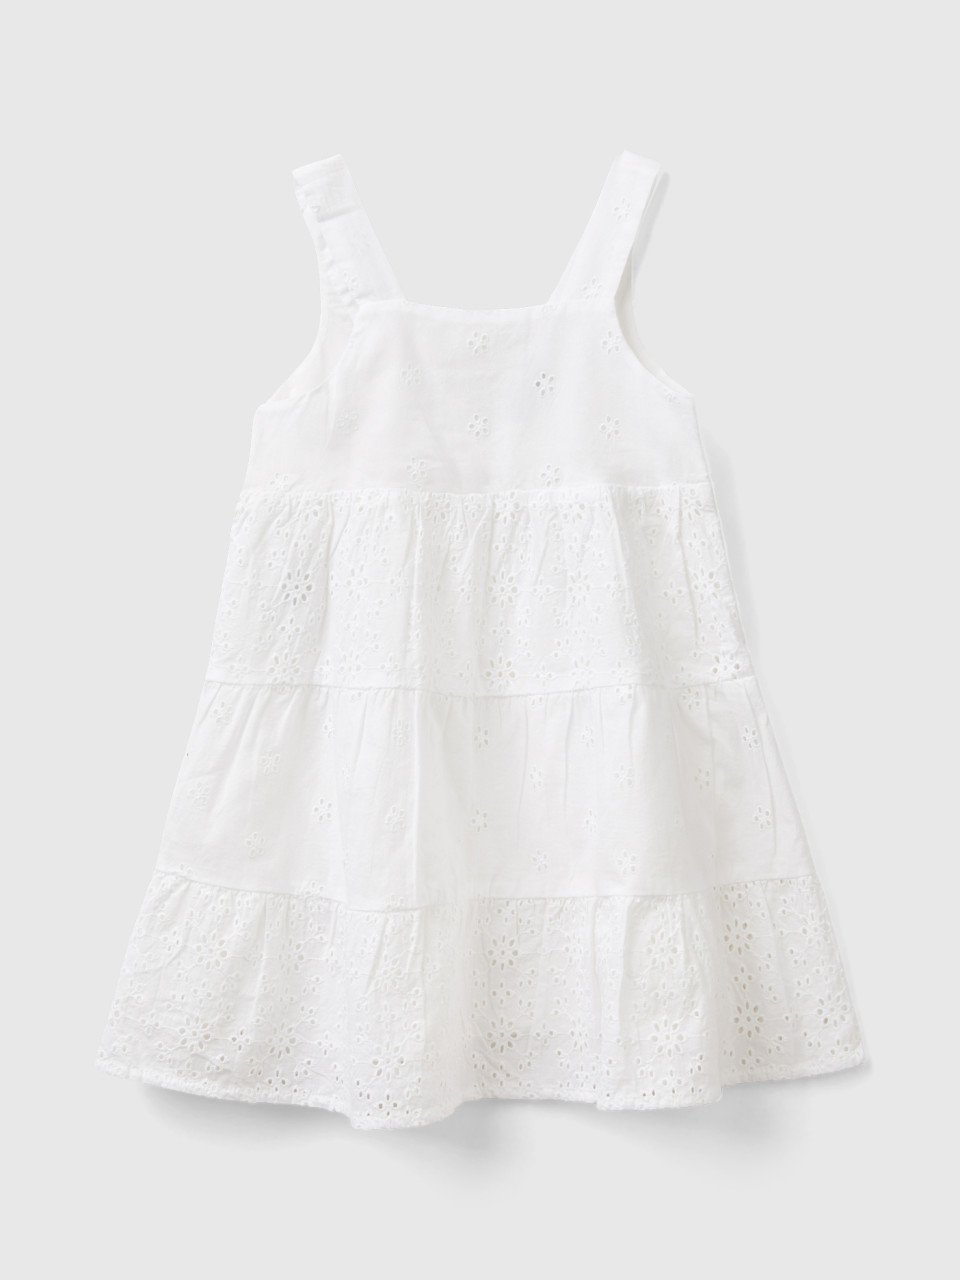 Benetton, Dress With Broderie Anglaise Embroidery, White, Kids